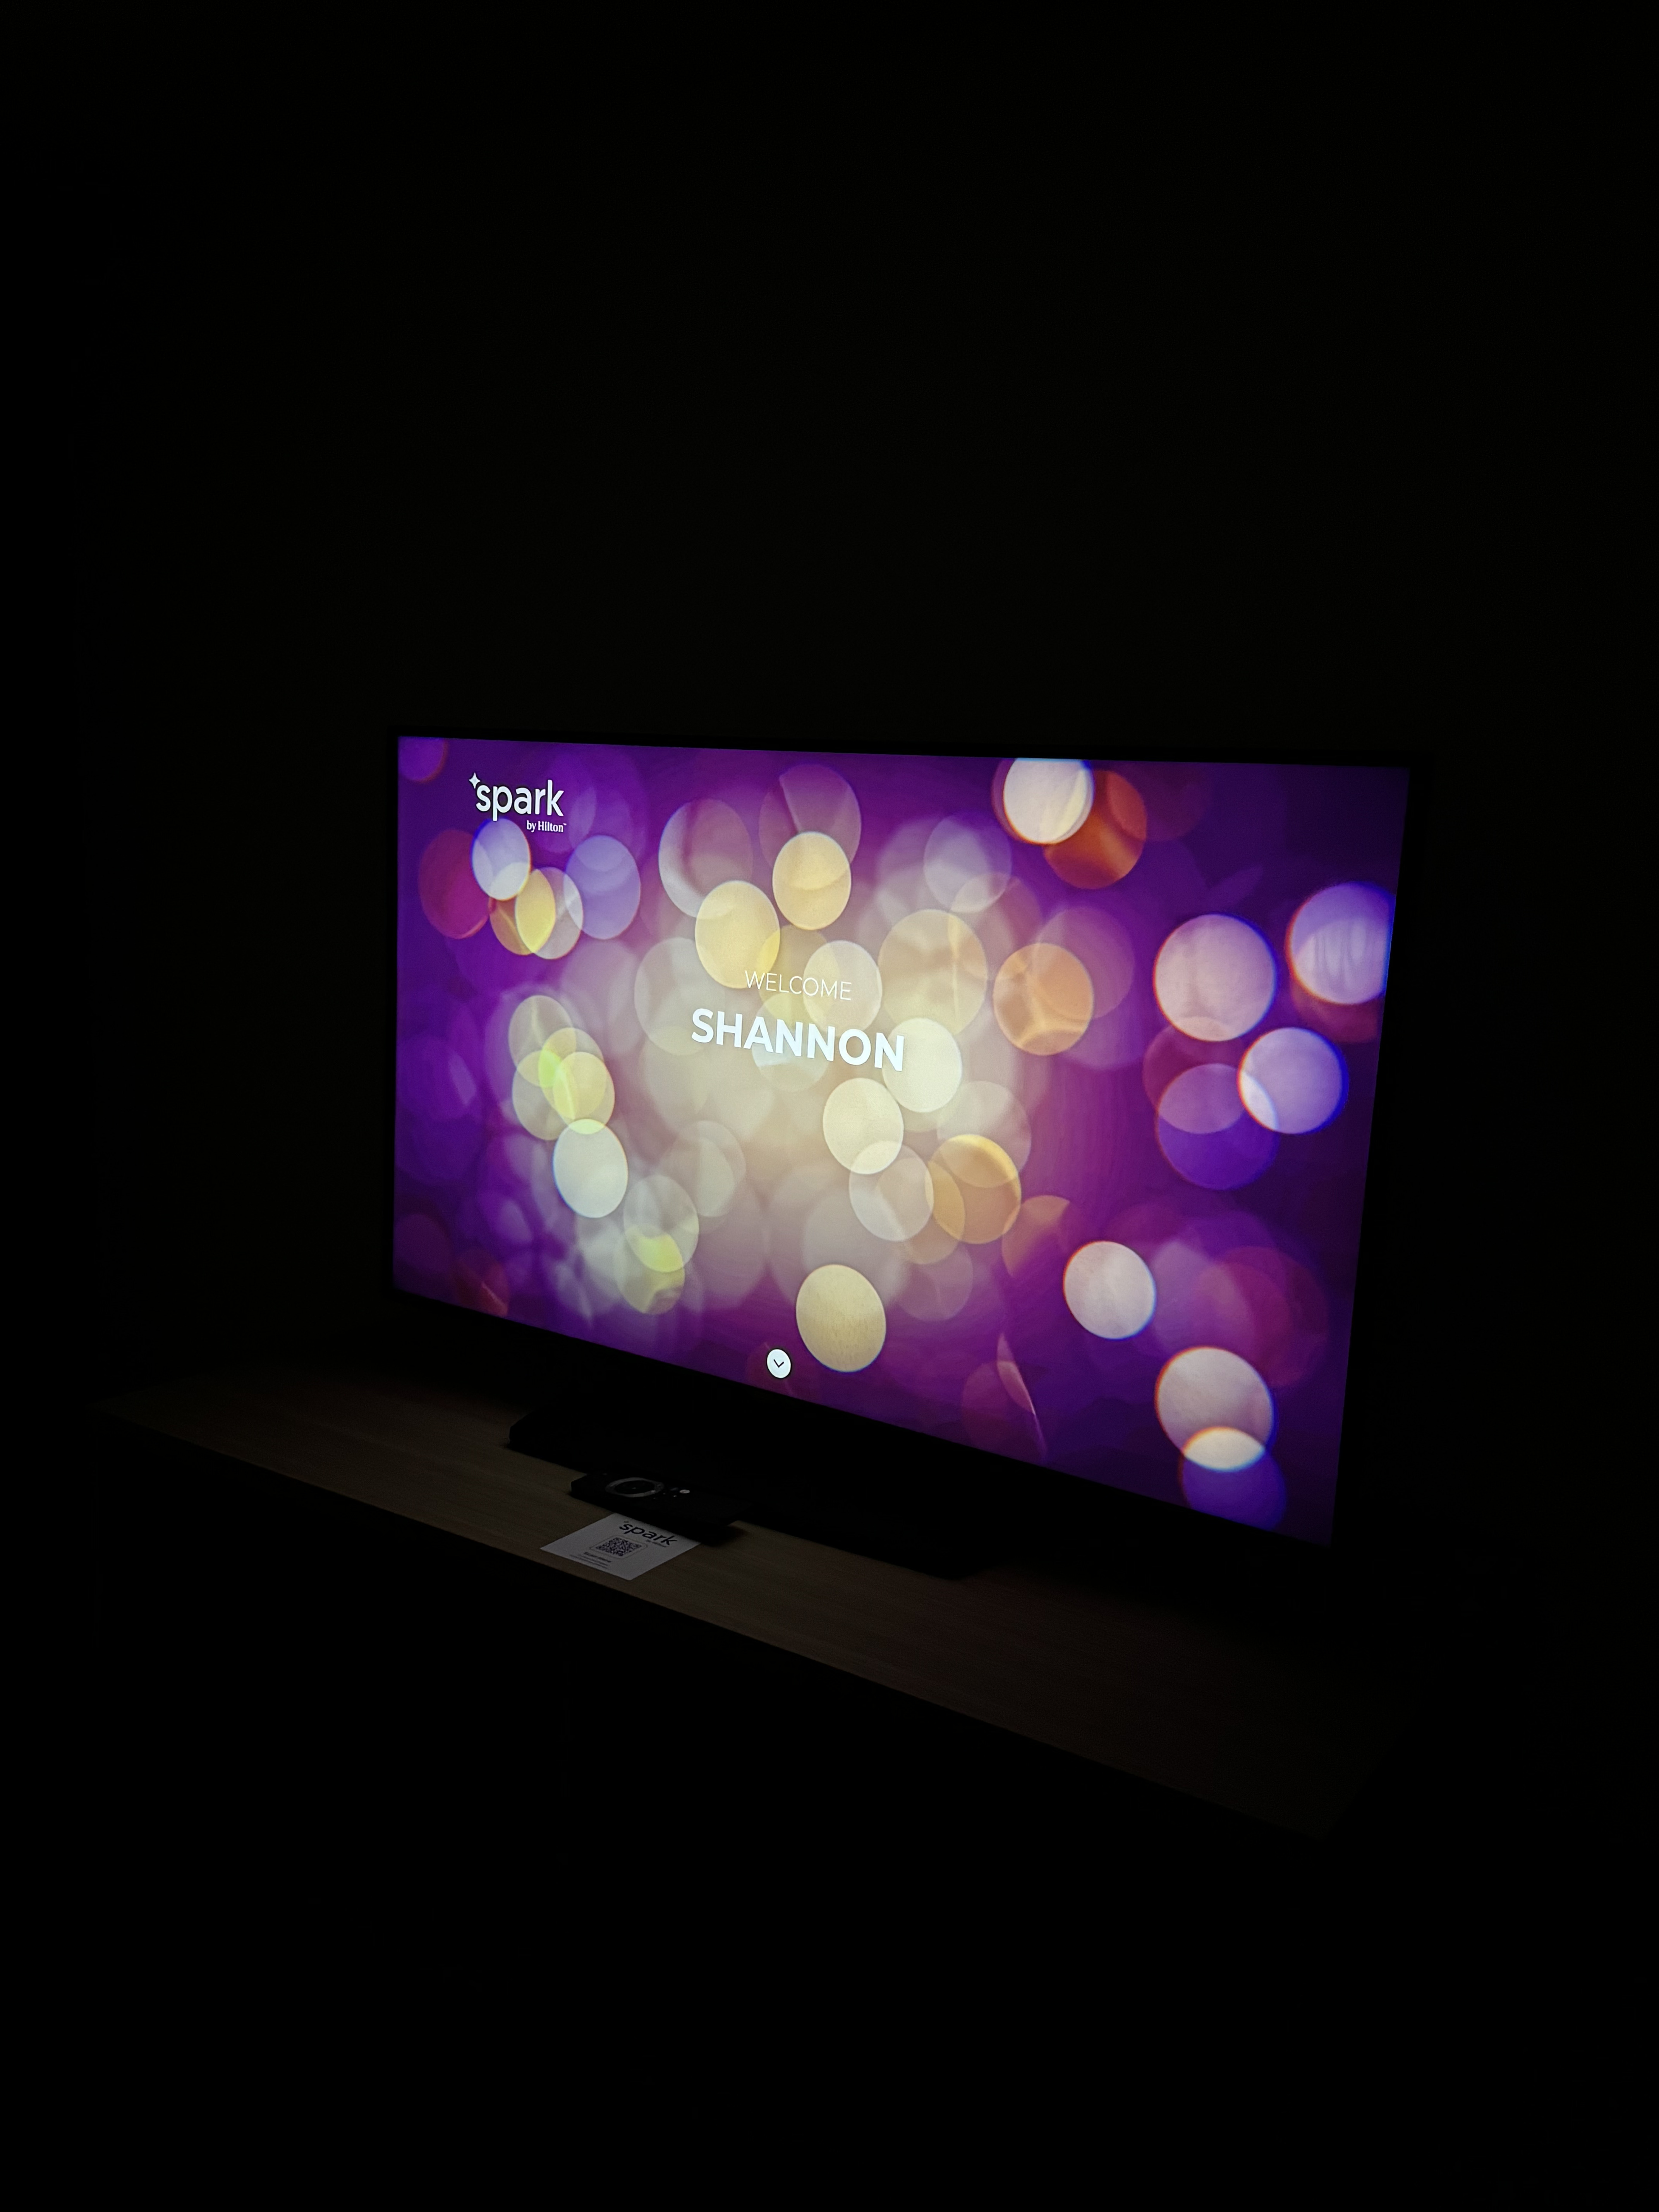 A flatscreen TV showing the words 'Welcome, Shannon' with a flowery background.